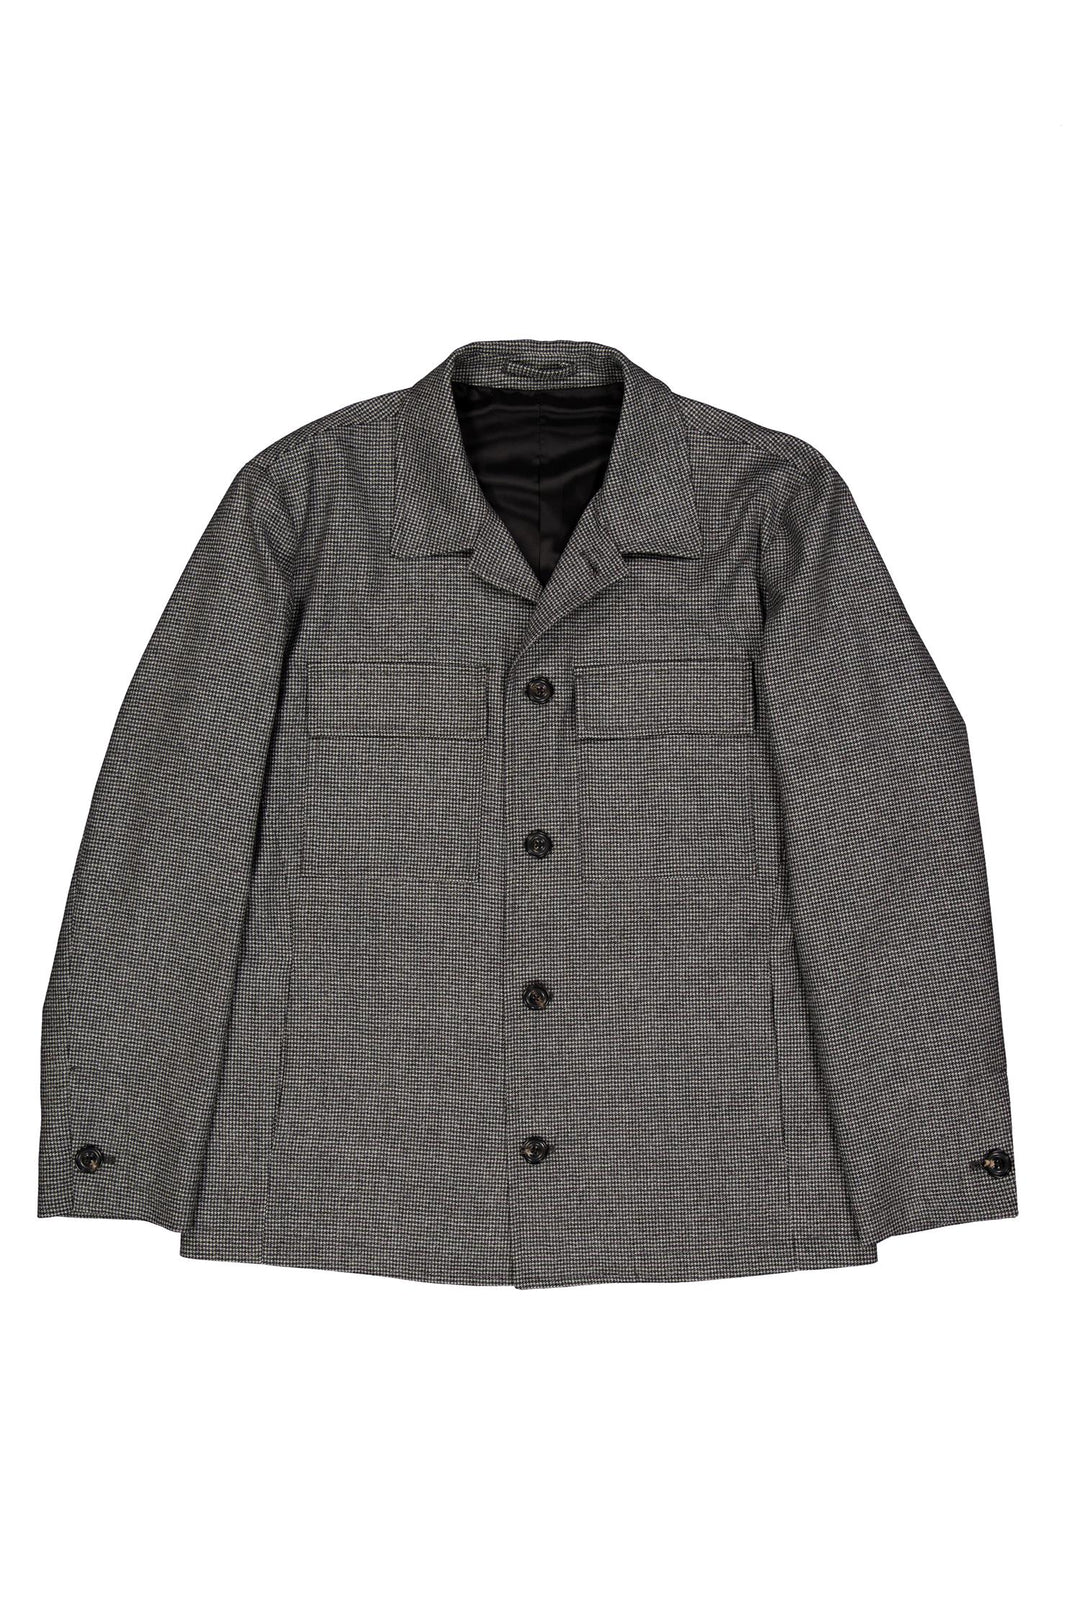 Wool/Cashmere Houndstooth Overshirt